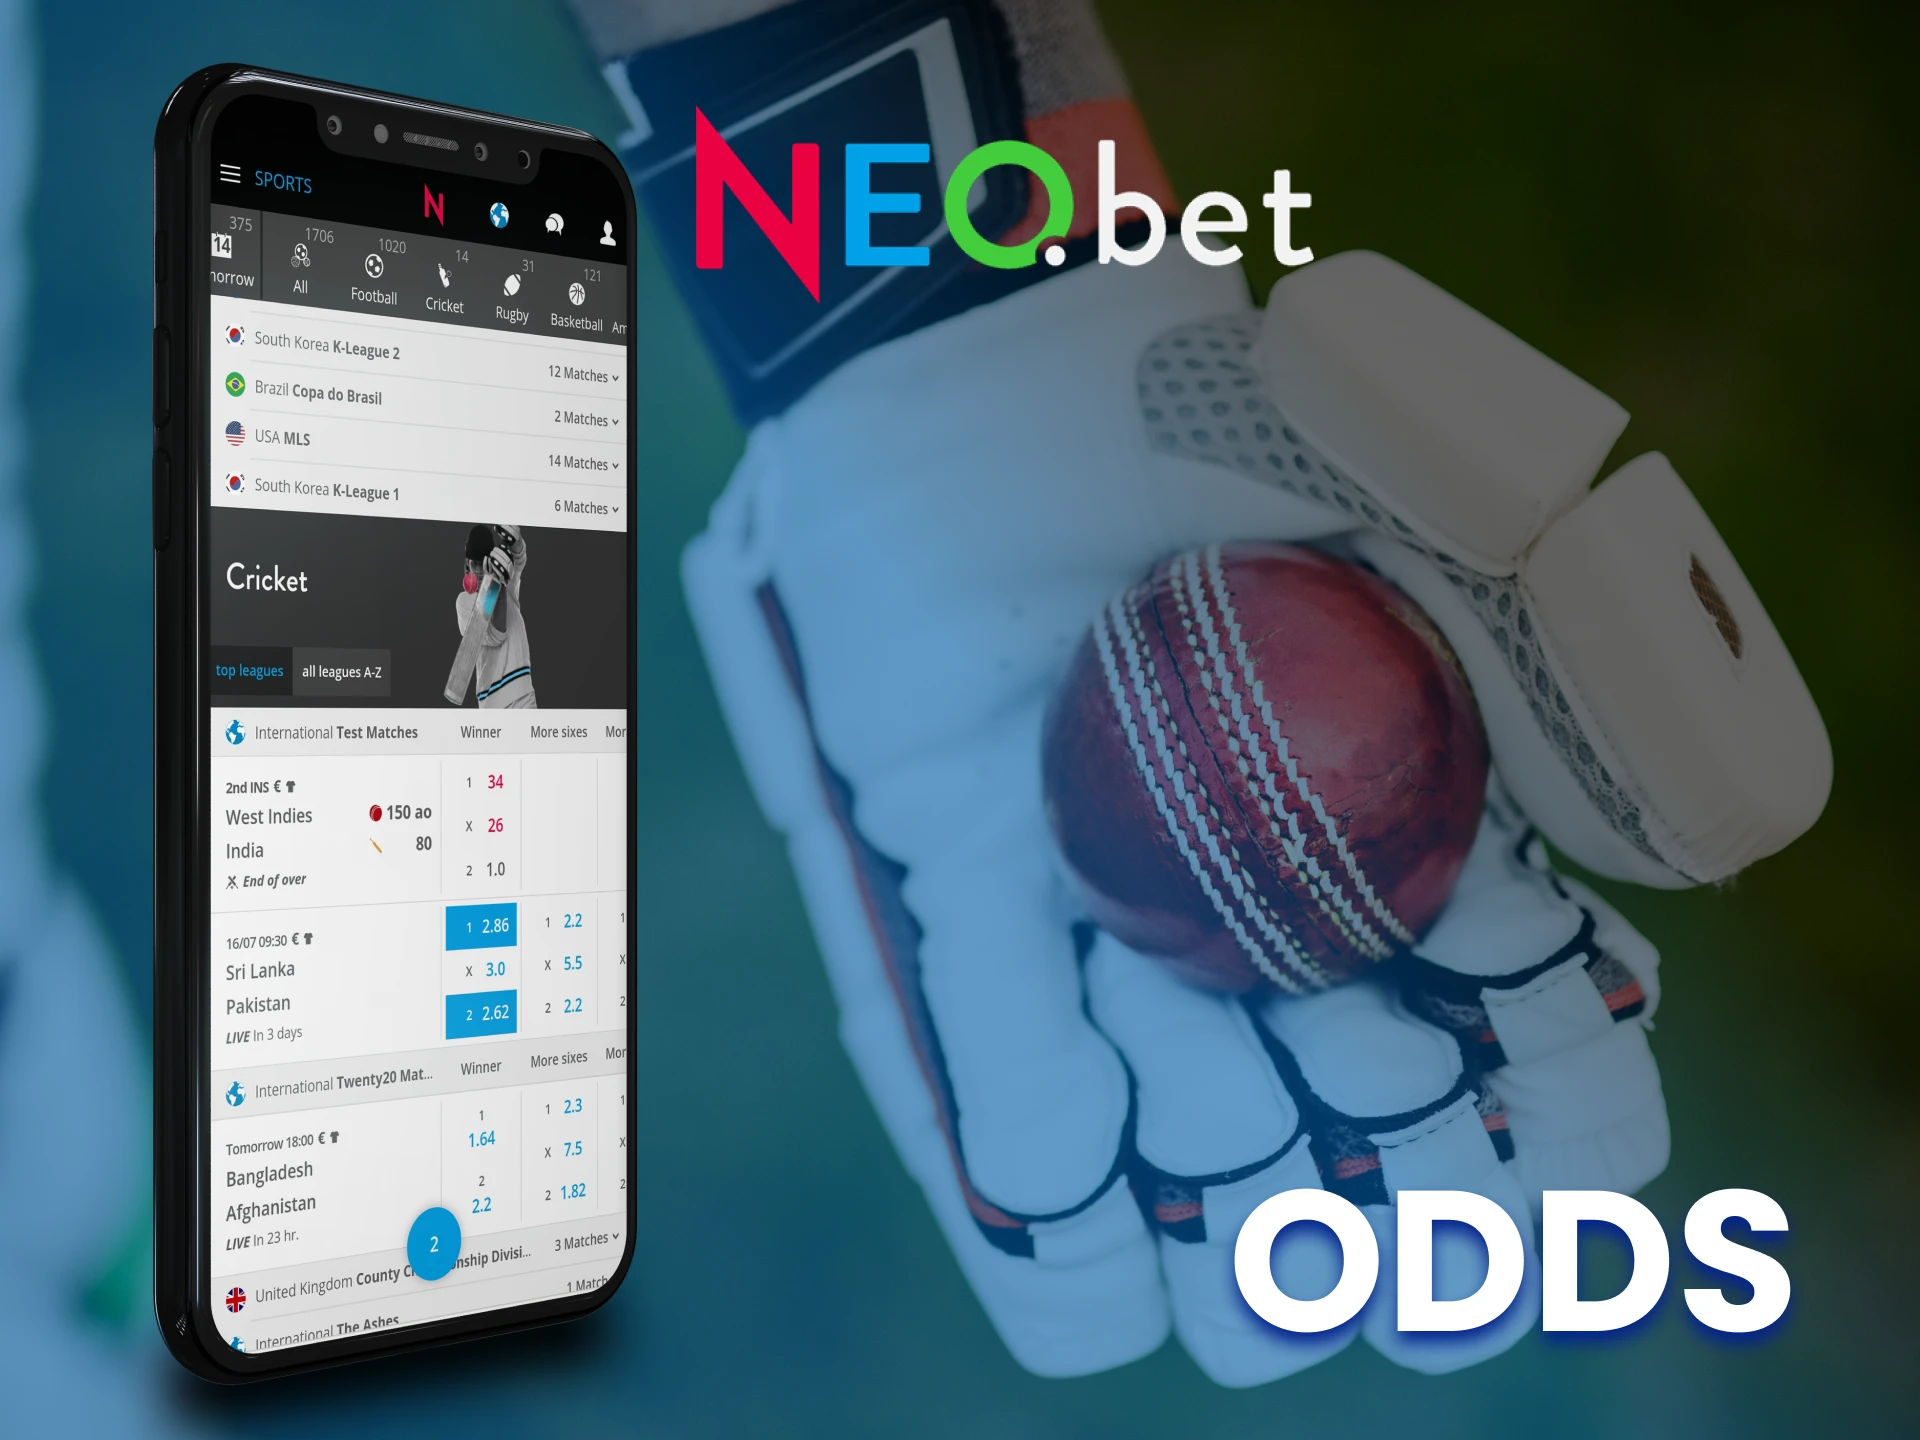 In the NEO.bet app you can count on great odds.